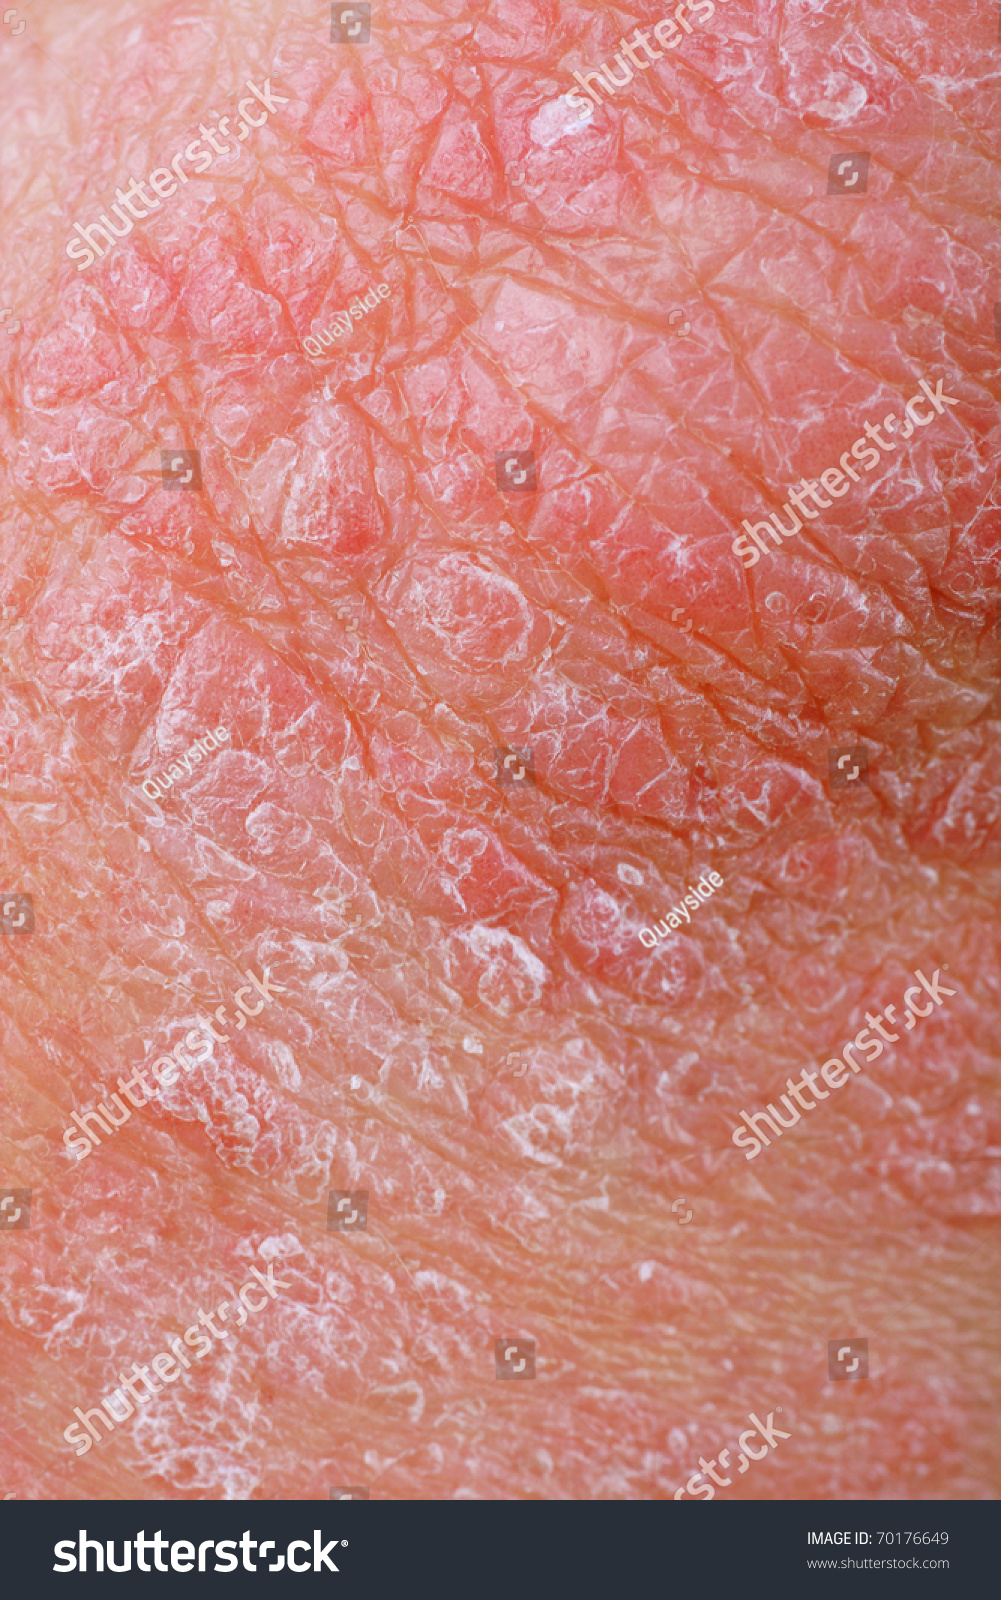 Close Up Of A Patients Elbow Showing Plaques Of Dry Skin Typically Seen